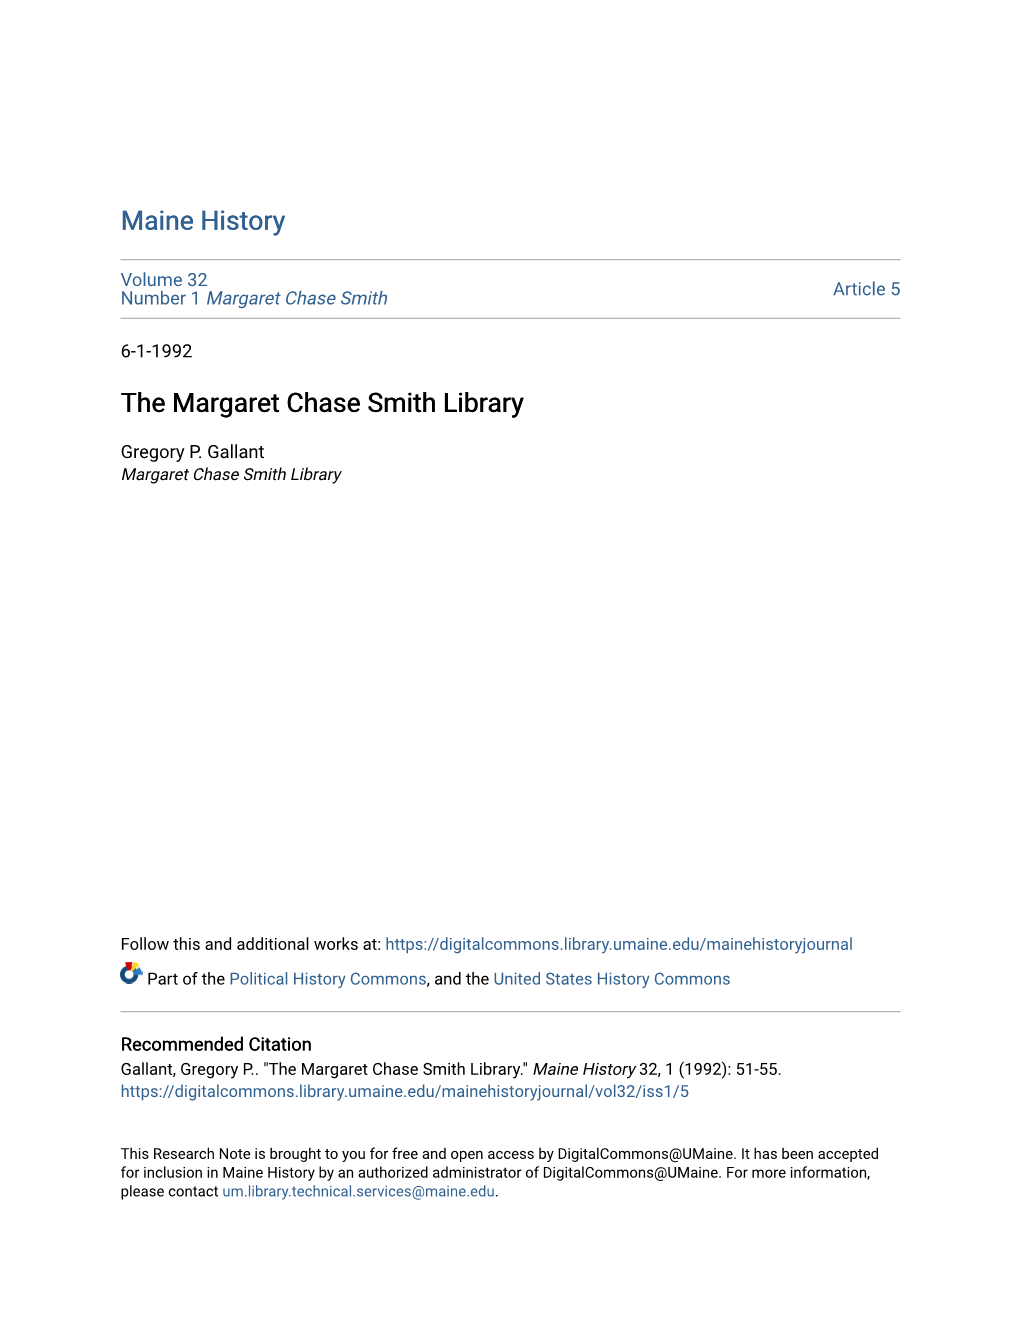 The Margaret Chase Smith Library